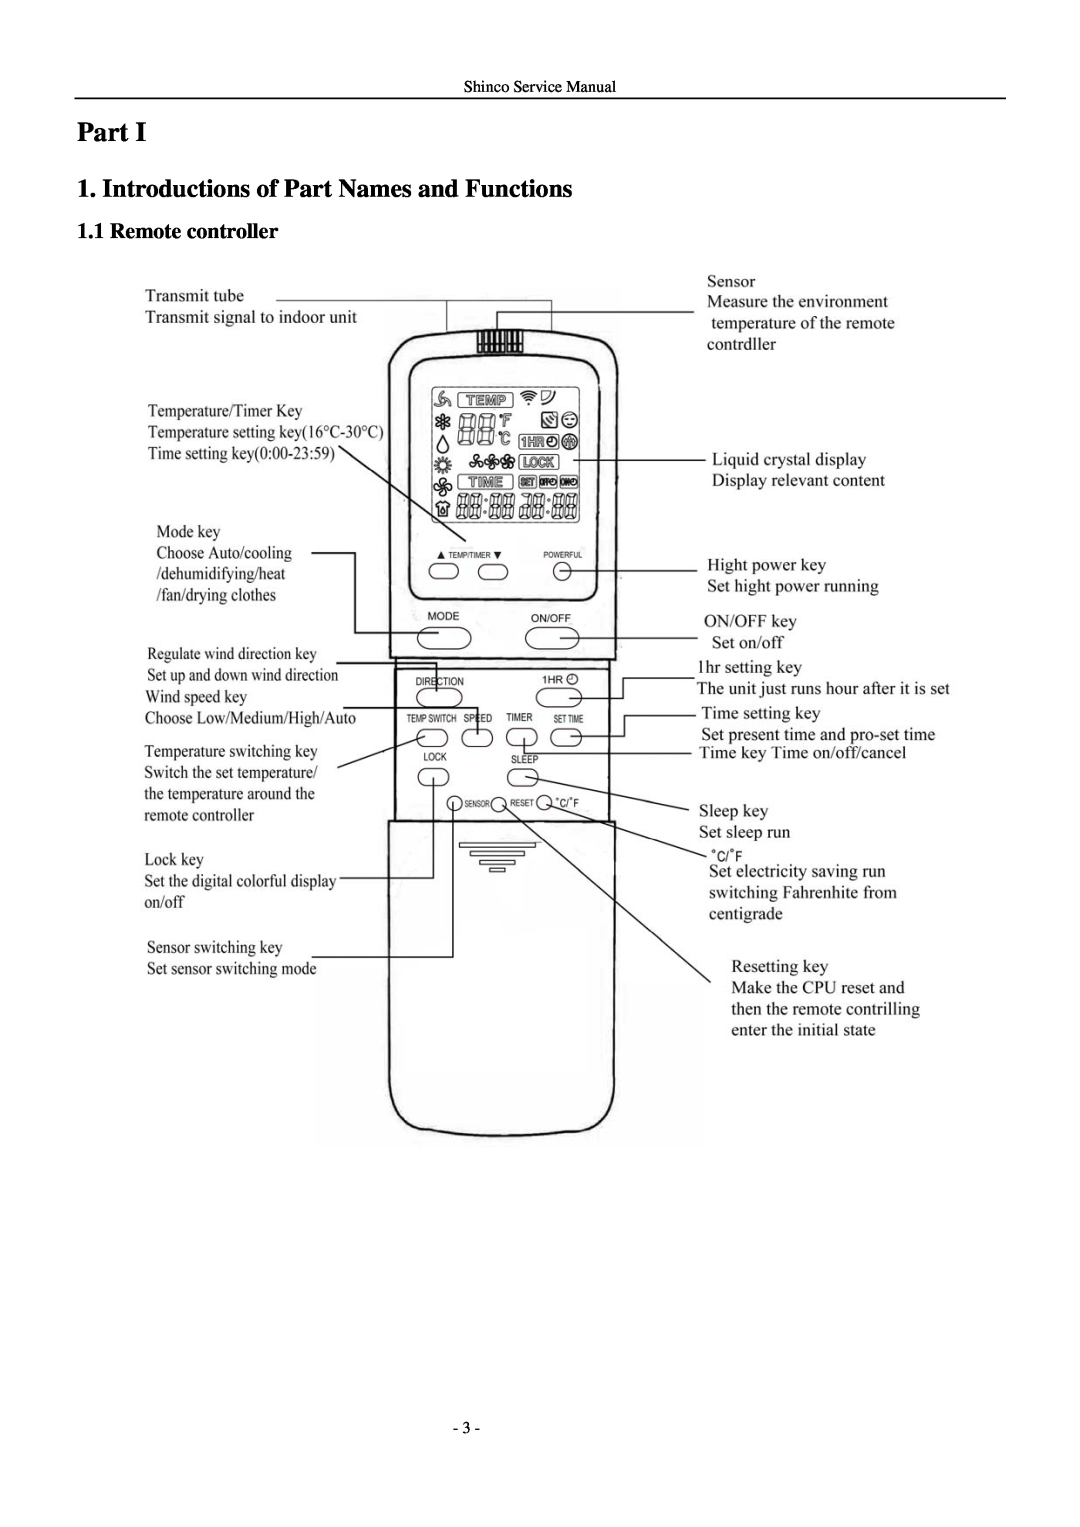 Shinco KFR-25GWZ BM service manual Introductions of Part Names and Functions, Remote controller 